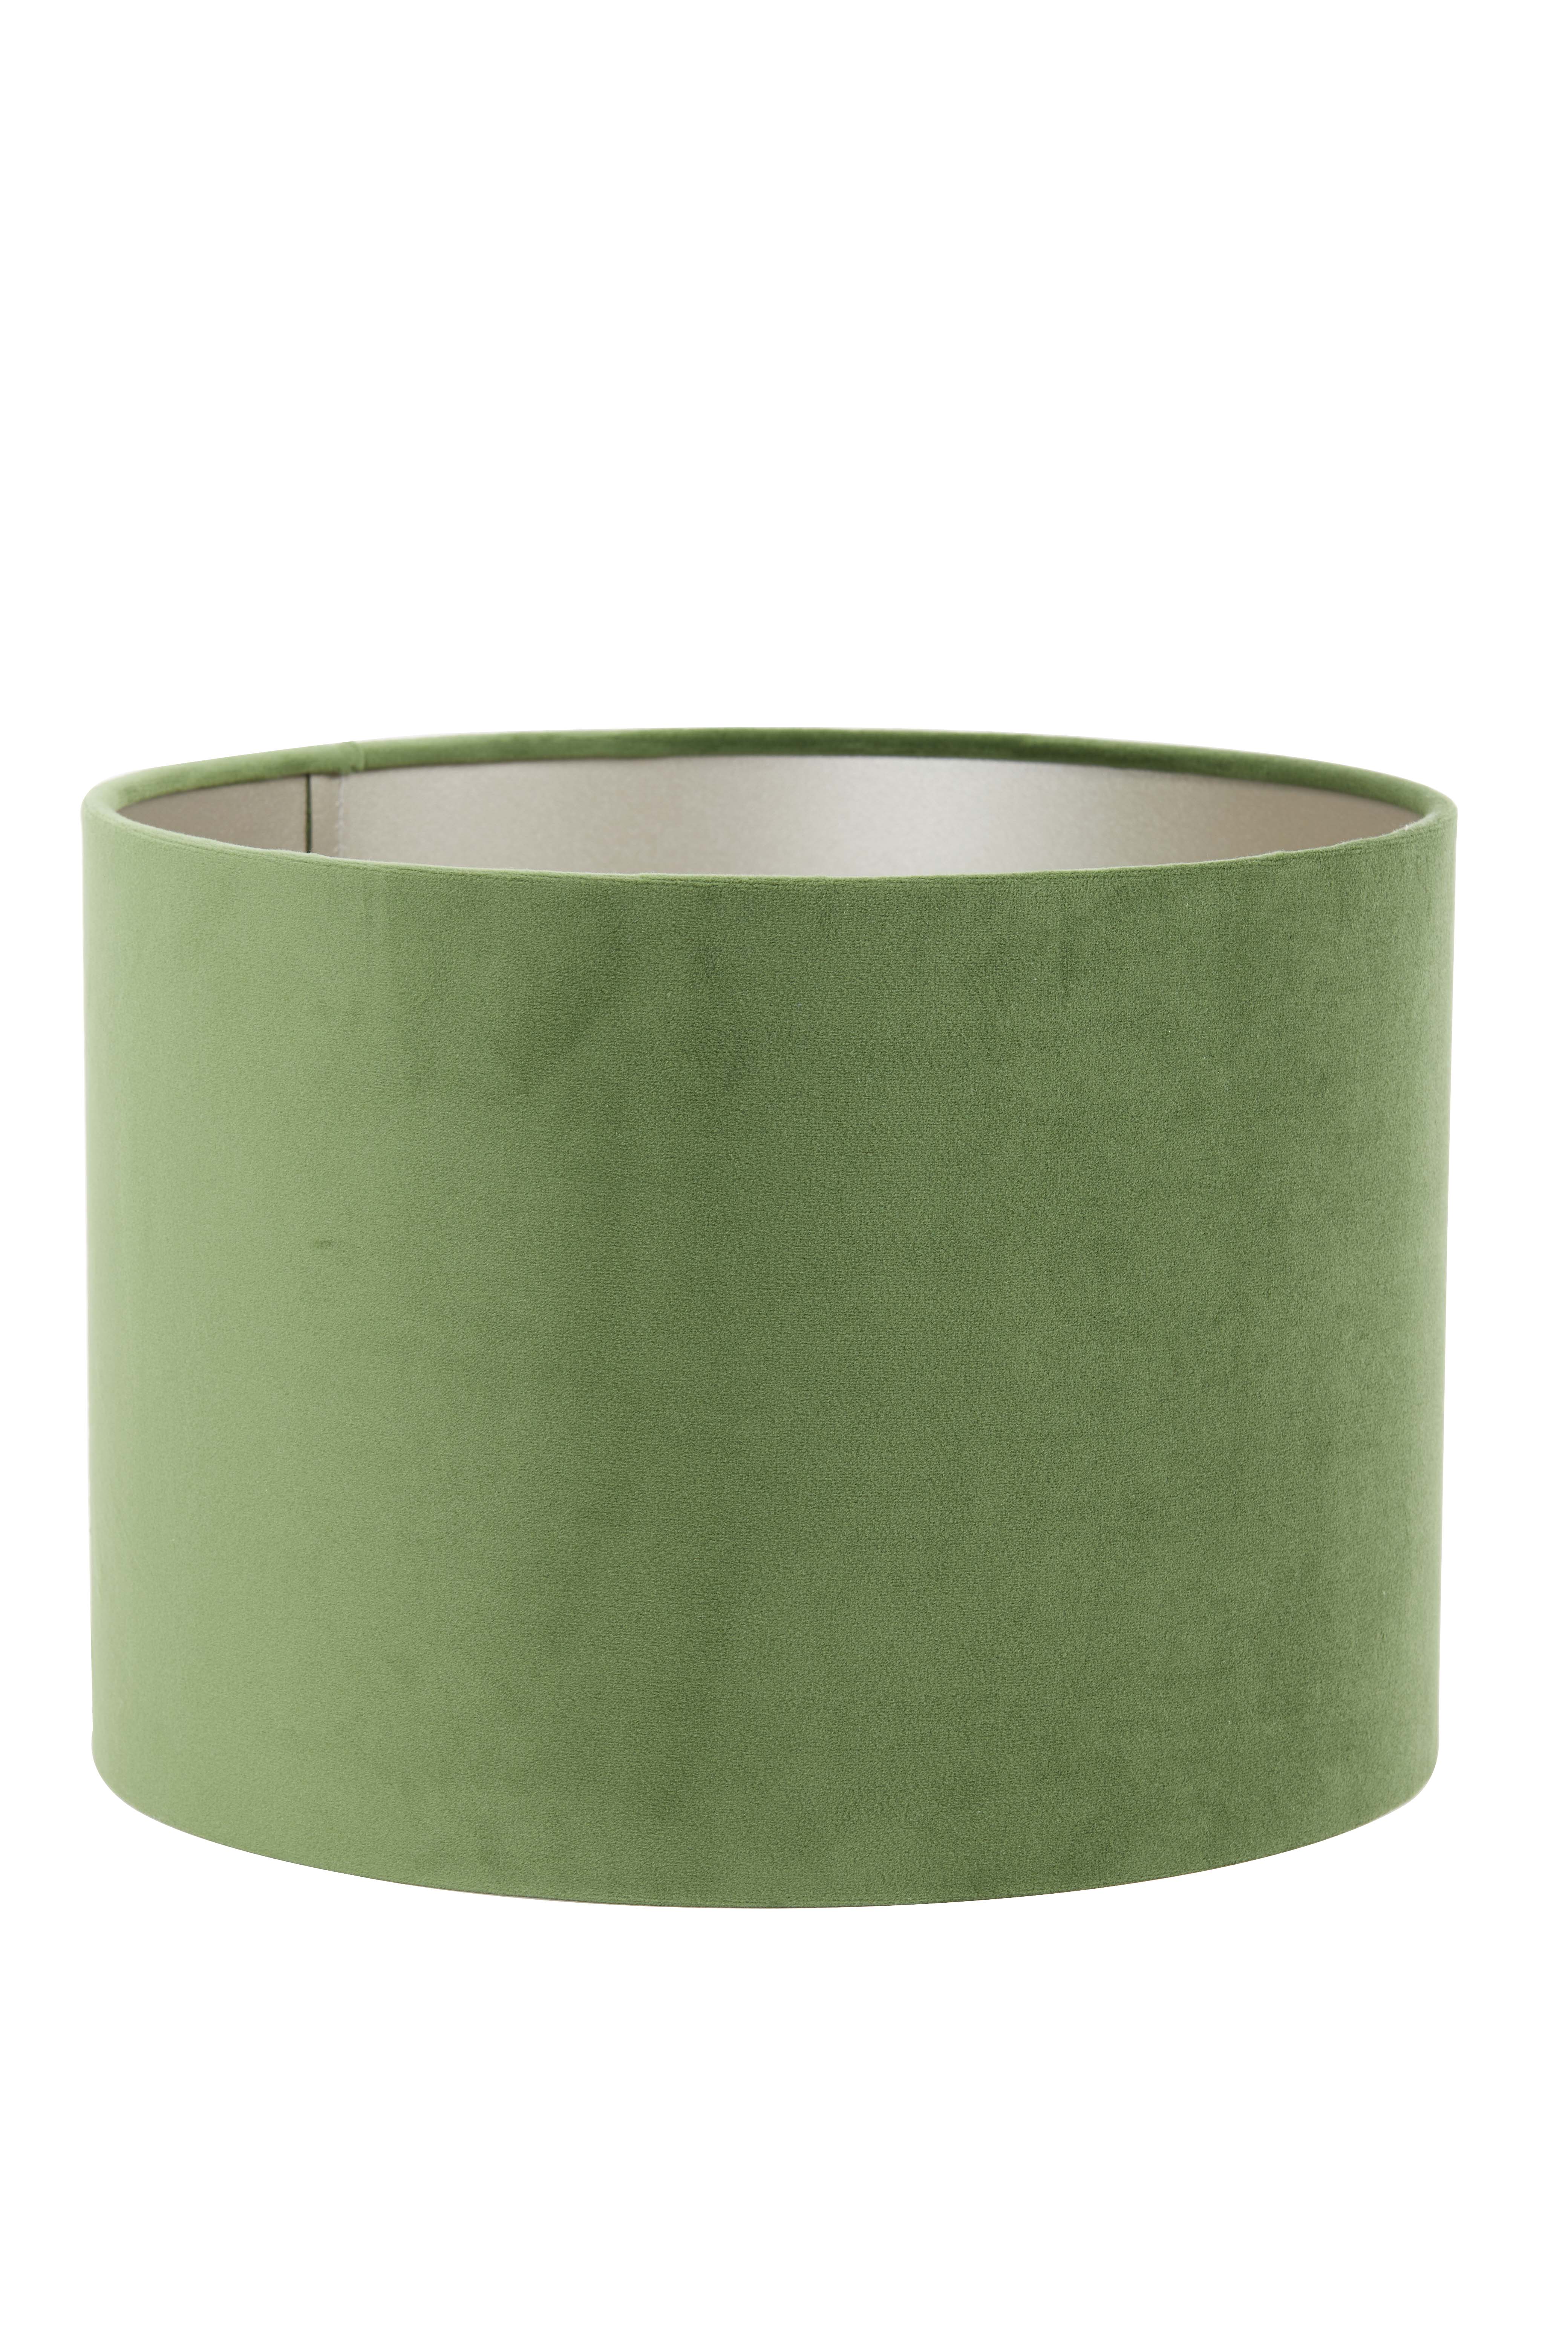 Shade cylinder 20-20-15 cm VELOURS dusty green